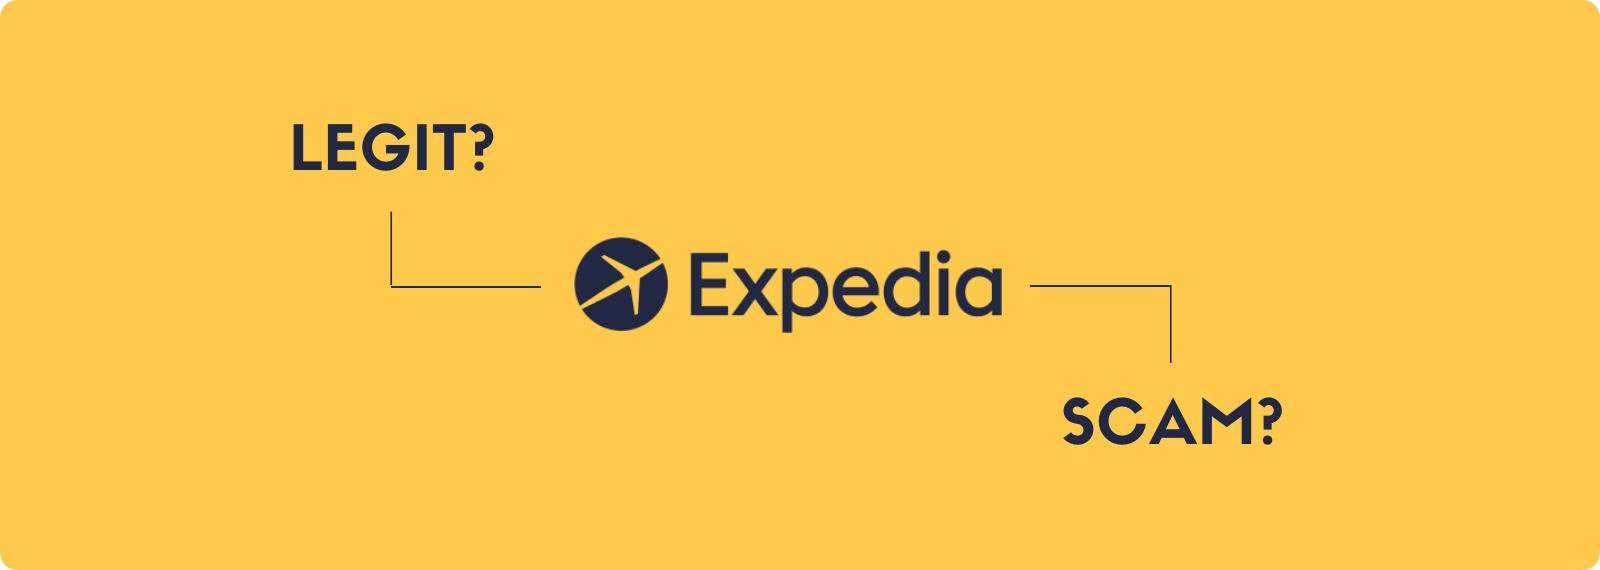 is expedia reliable